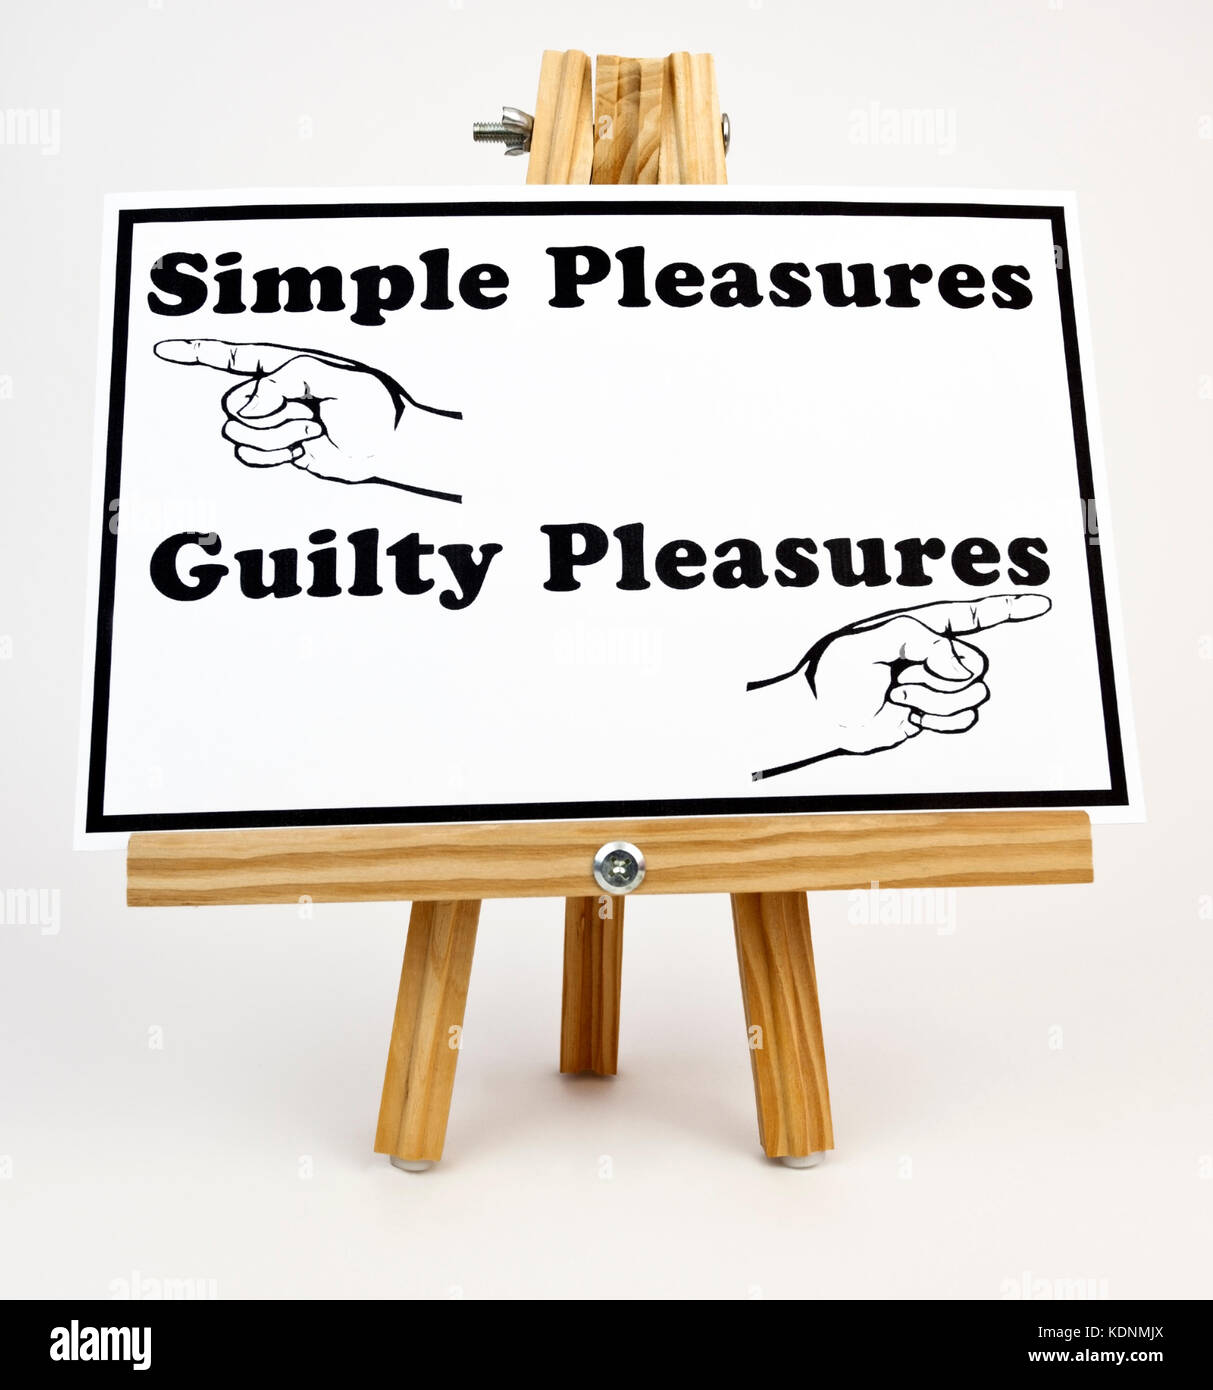 PLEASURES sign on easel. SIMPLE PLEASURES to the left. GUILTY PLEASURES to the right. Stock Photo